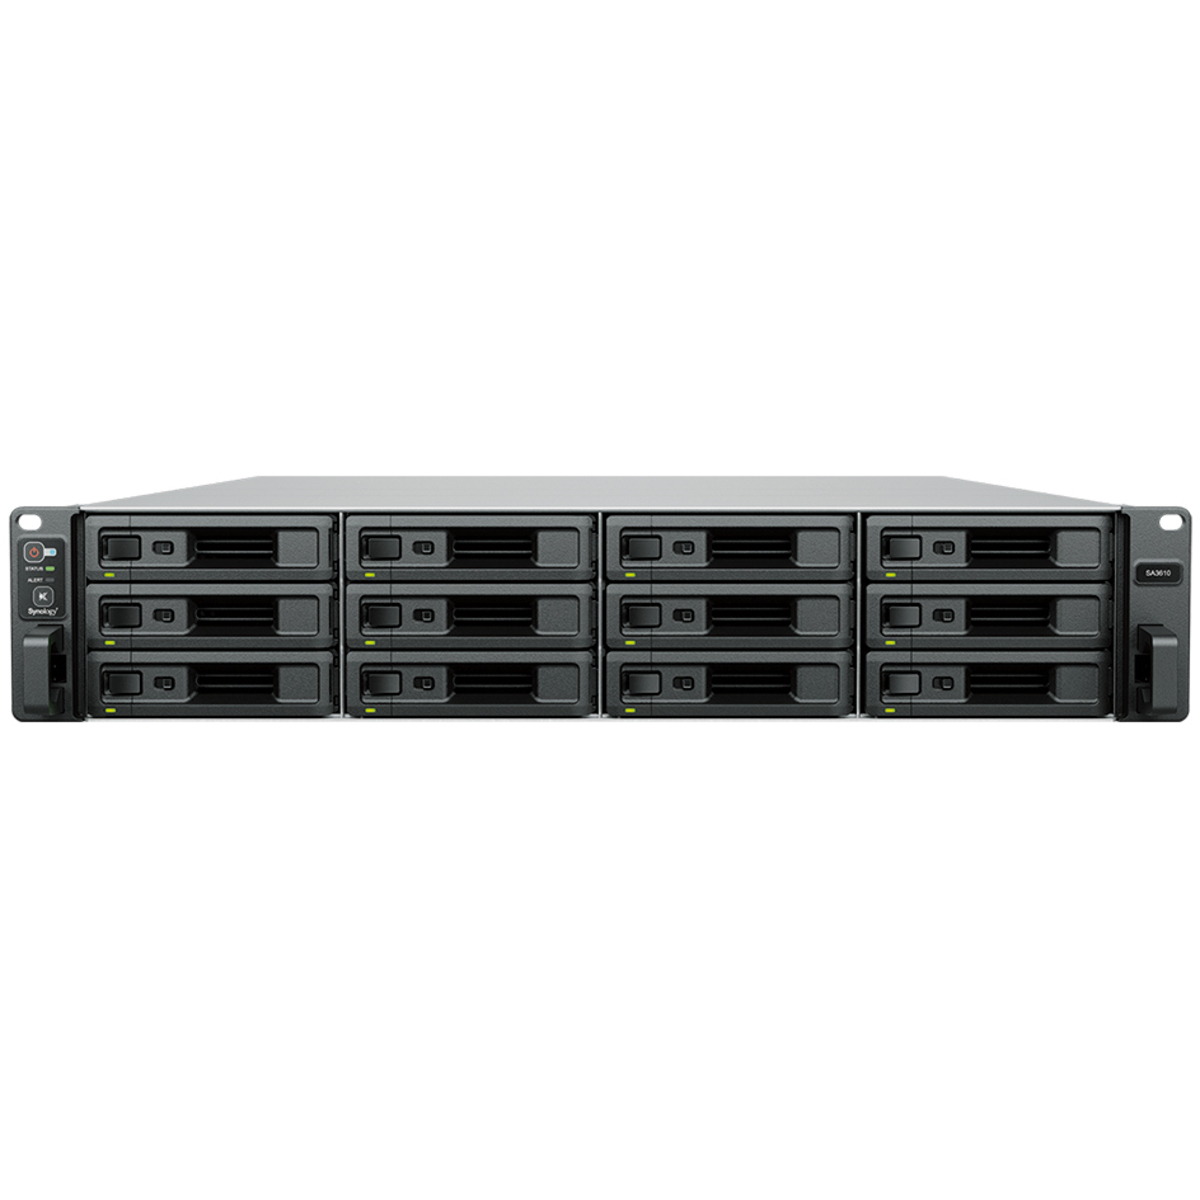 Synology RackStation SA3410 200tb 12-Bay RackMount Large Business / Enterprise NAS - Network Attached Storage Device 10x20tb Seagate EXOS X20 ST20000NM007D 3.5 7200rpm SATA 6Gb/s HDD ENTERPRISE Class Drives Installed - Burn-In Tested RackStation SA3410